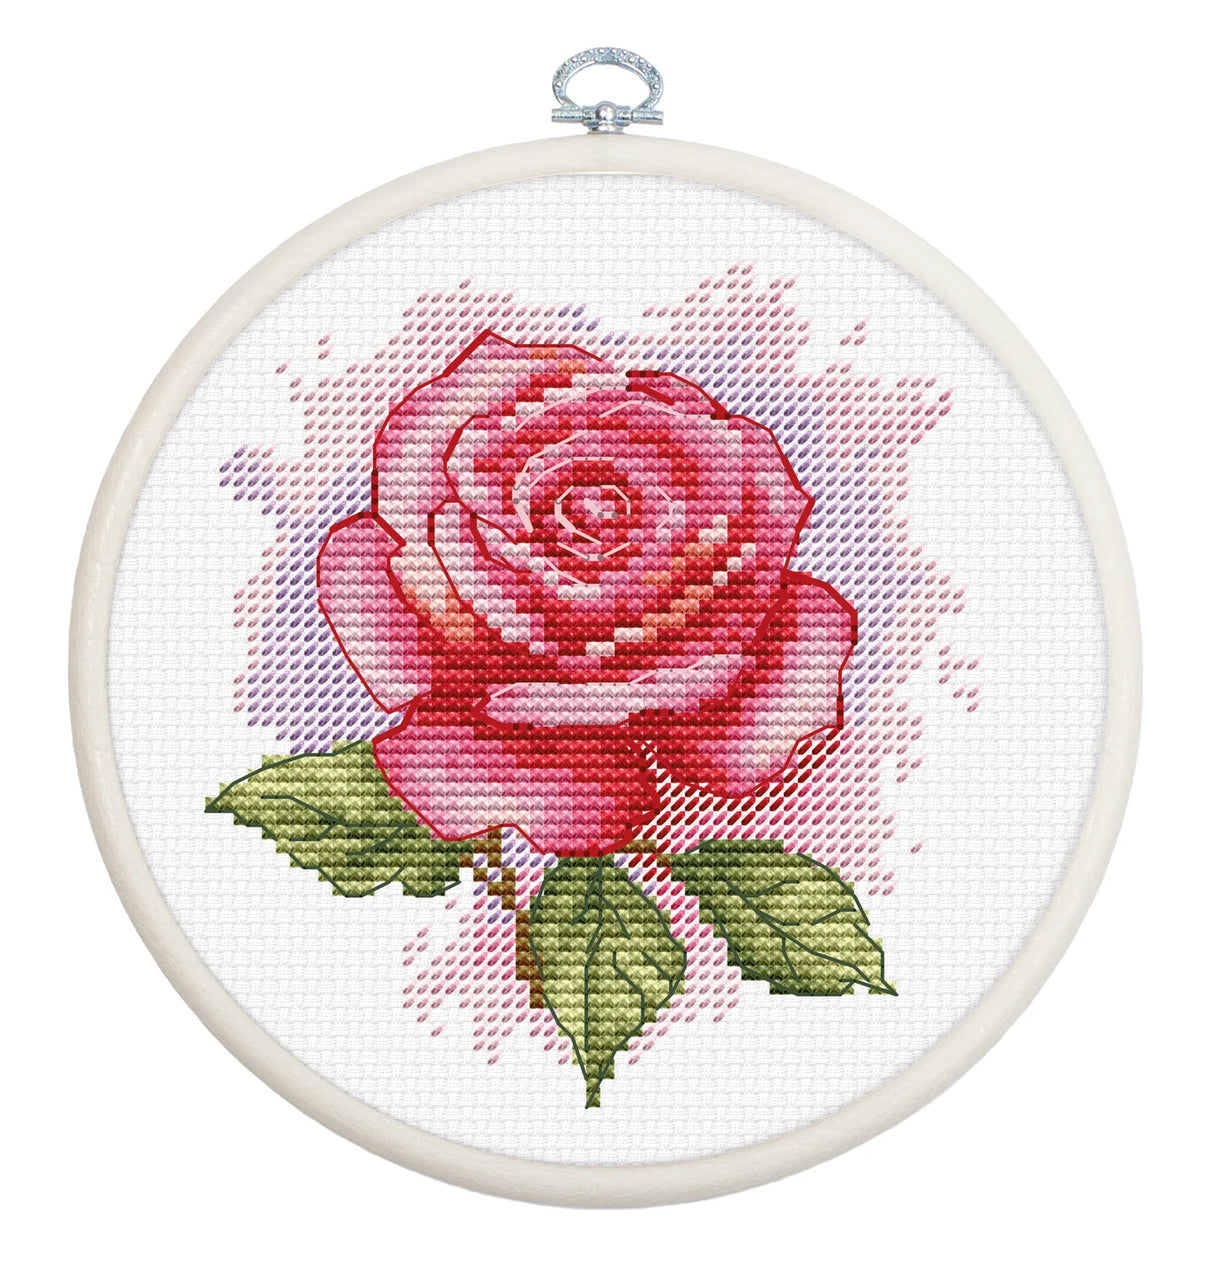 Luca-S Cross Stitch Kit with Hoop Included - "Aroma de Rosa", BC105